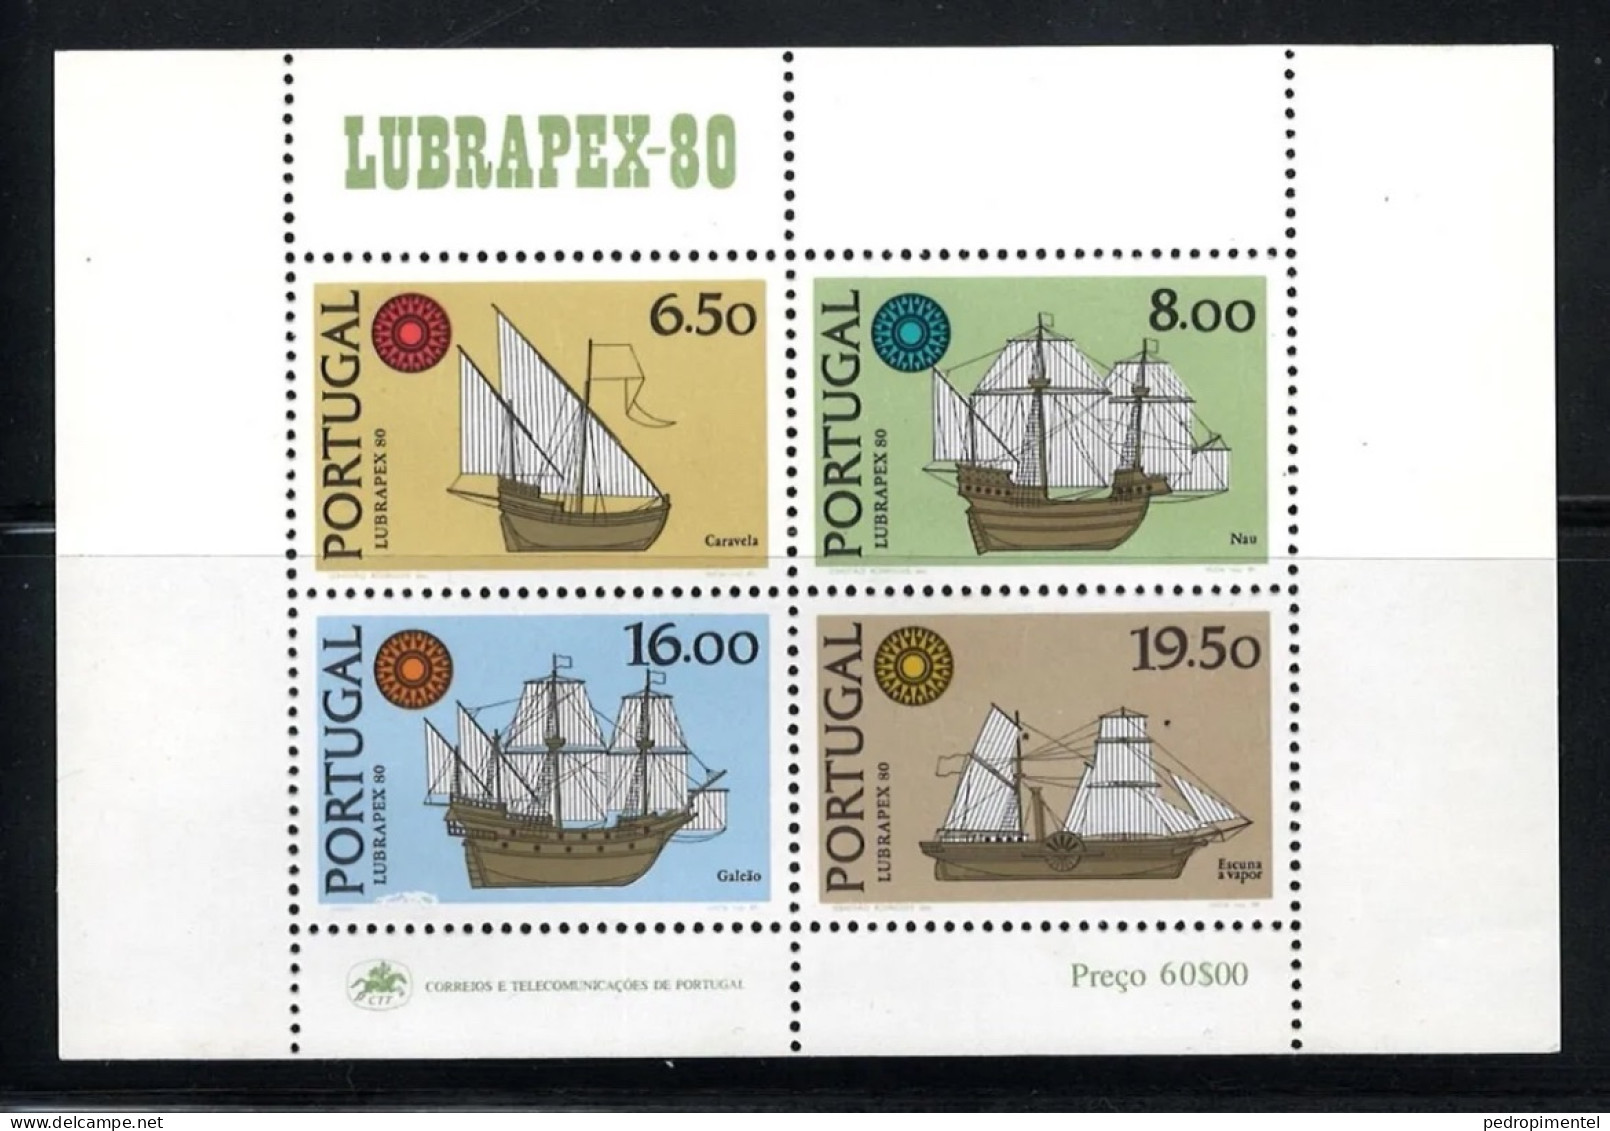 Portugal Stamps 1980 "Lubrapex 80" Condition MNH #1492-1495 (minisheet+stamps) - Ongebruikt